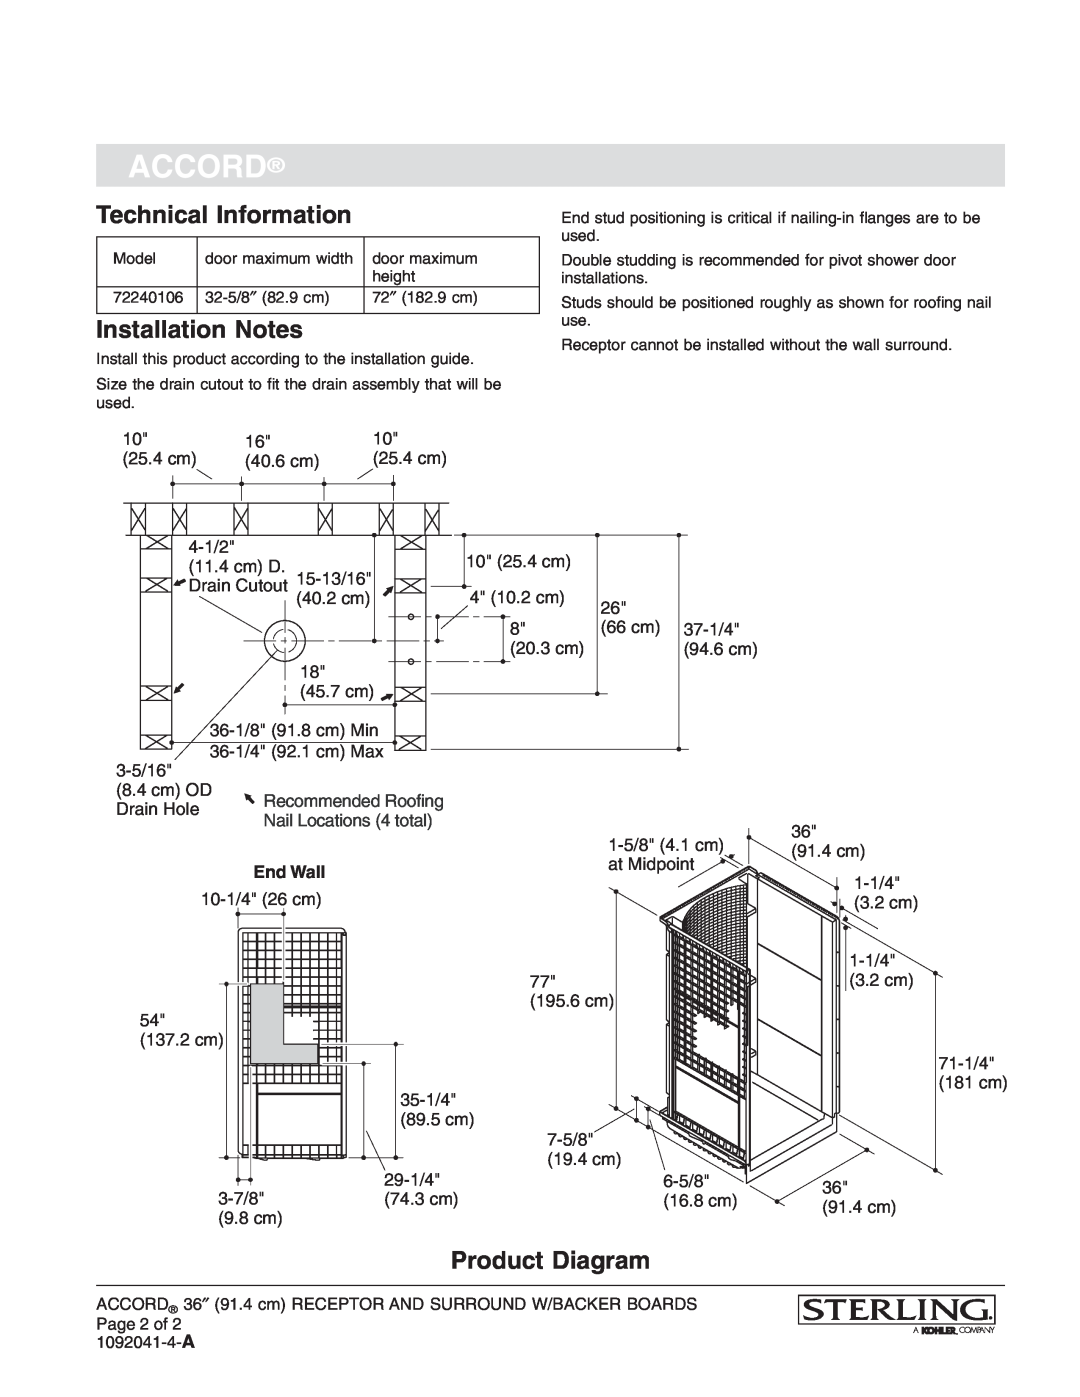 Sterling Plumbing 72240106 warranty Technical Information, Installation Notes, Product Diagram, End Wall, Accord 